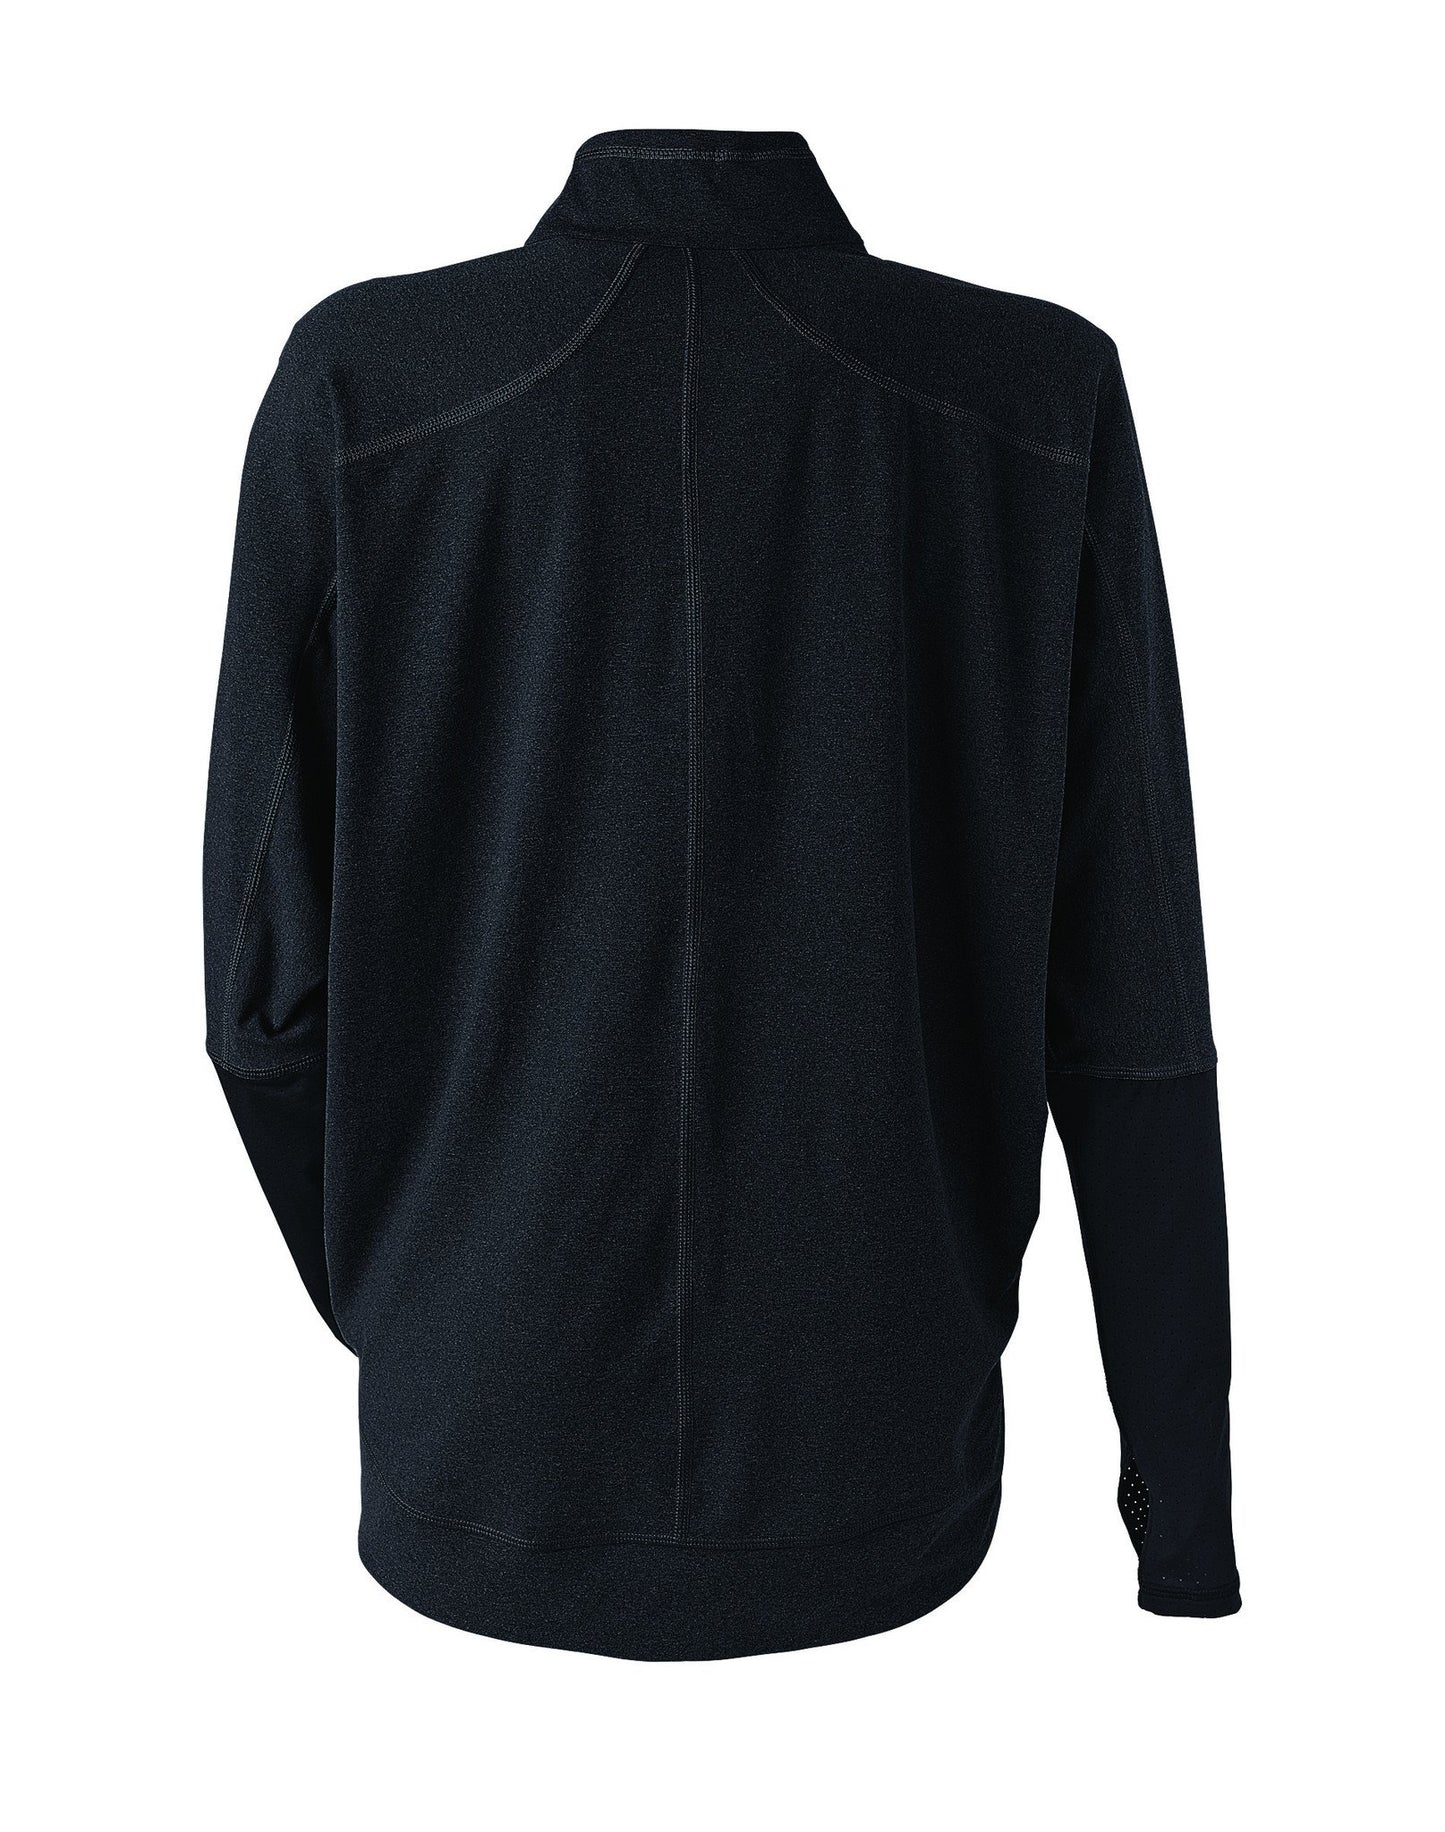 Sudadera Deportiva Champion Absolute Novelty Cover-Up